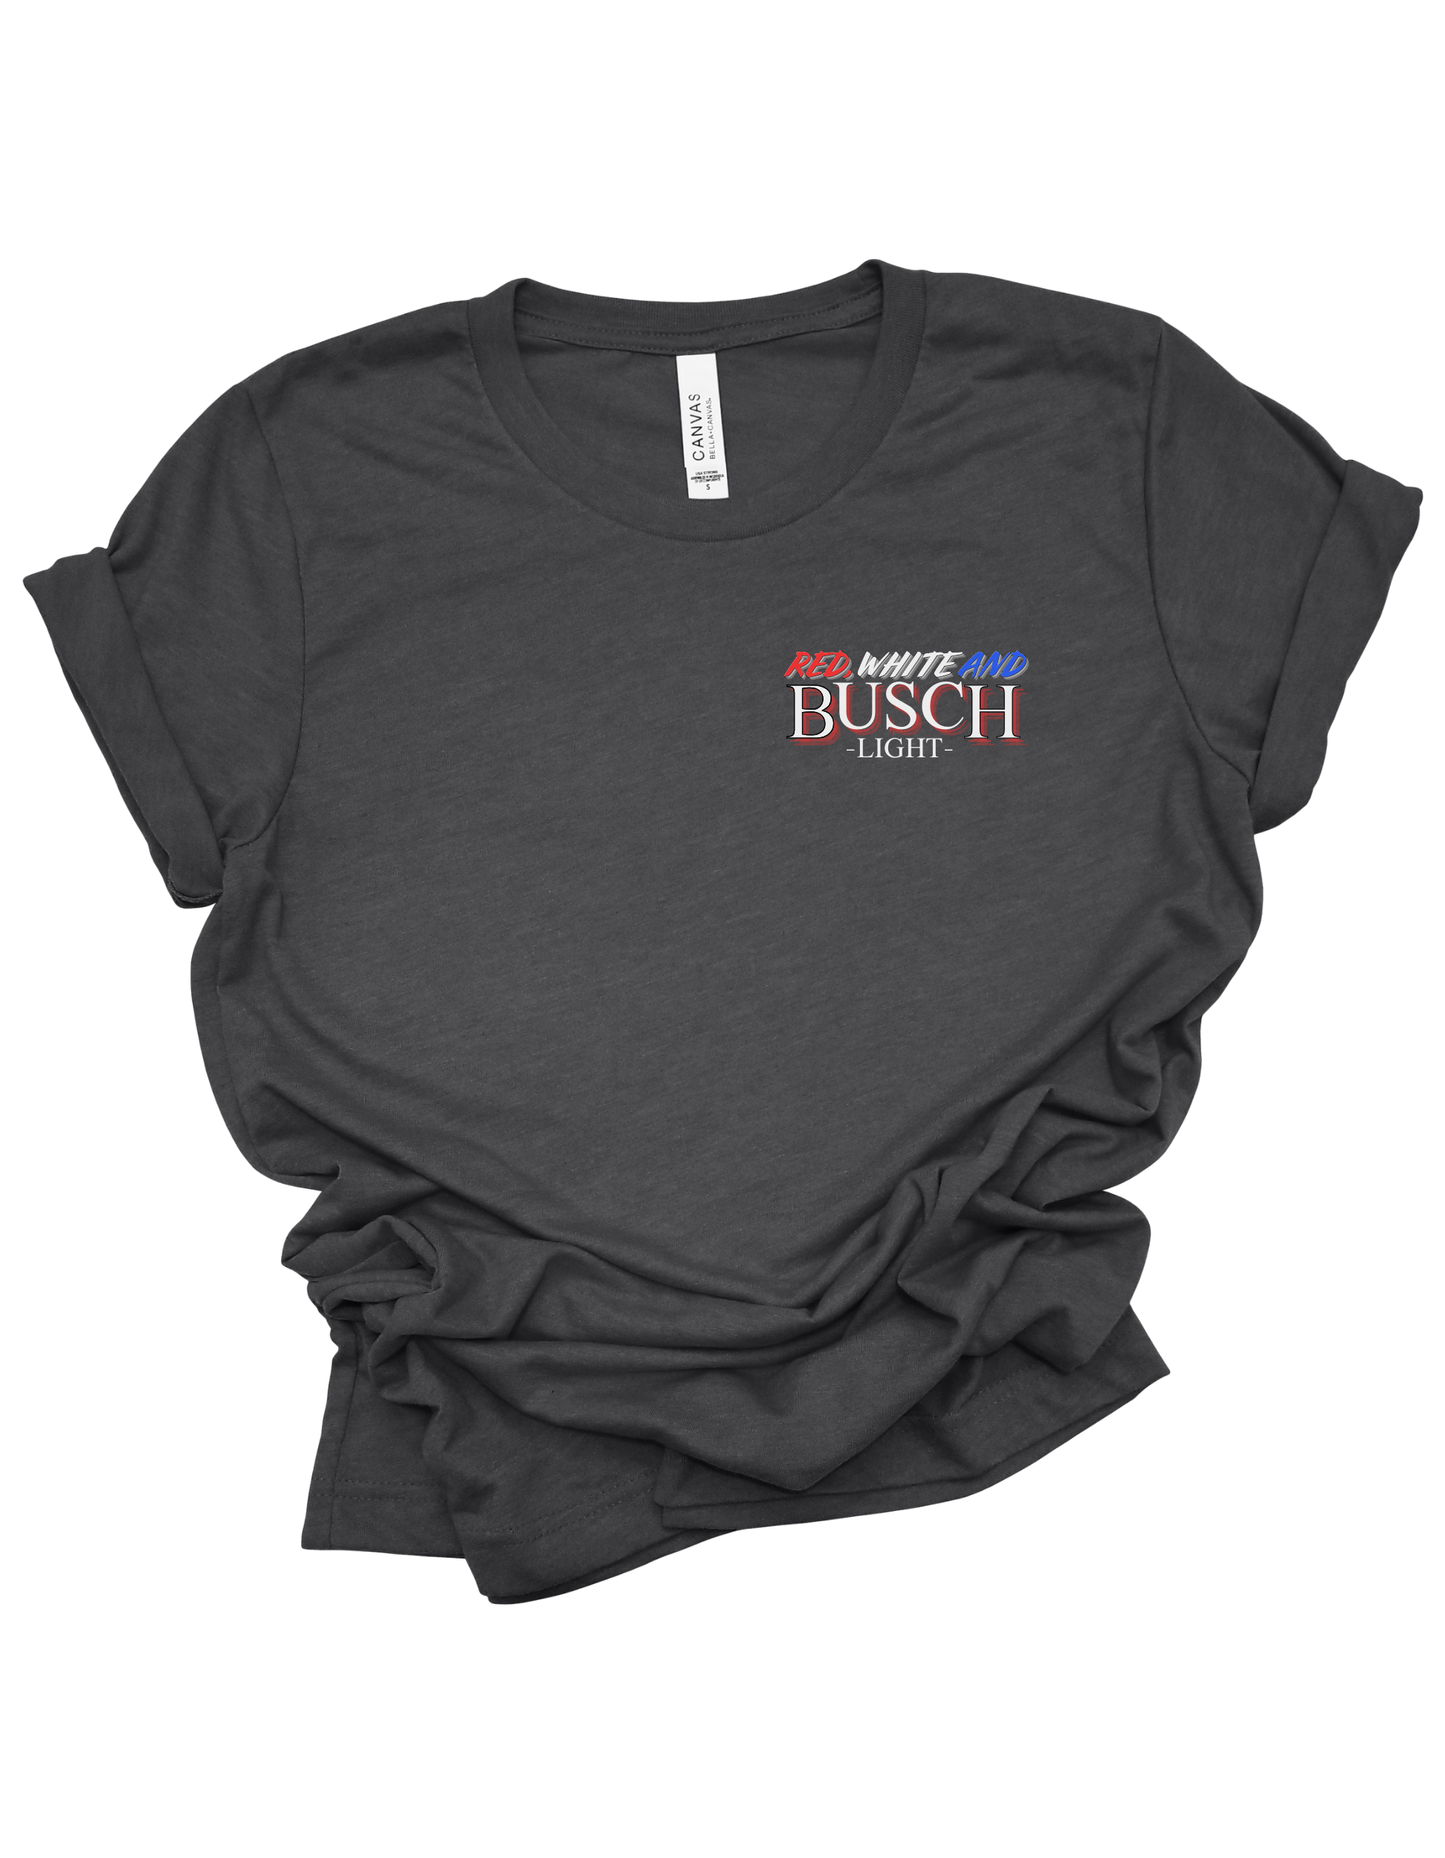 Red, White And Busch Light Tshirt